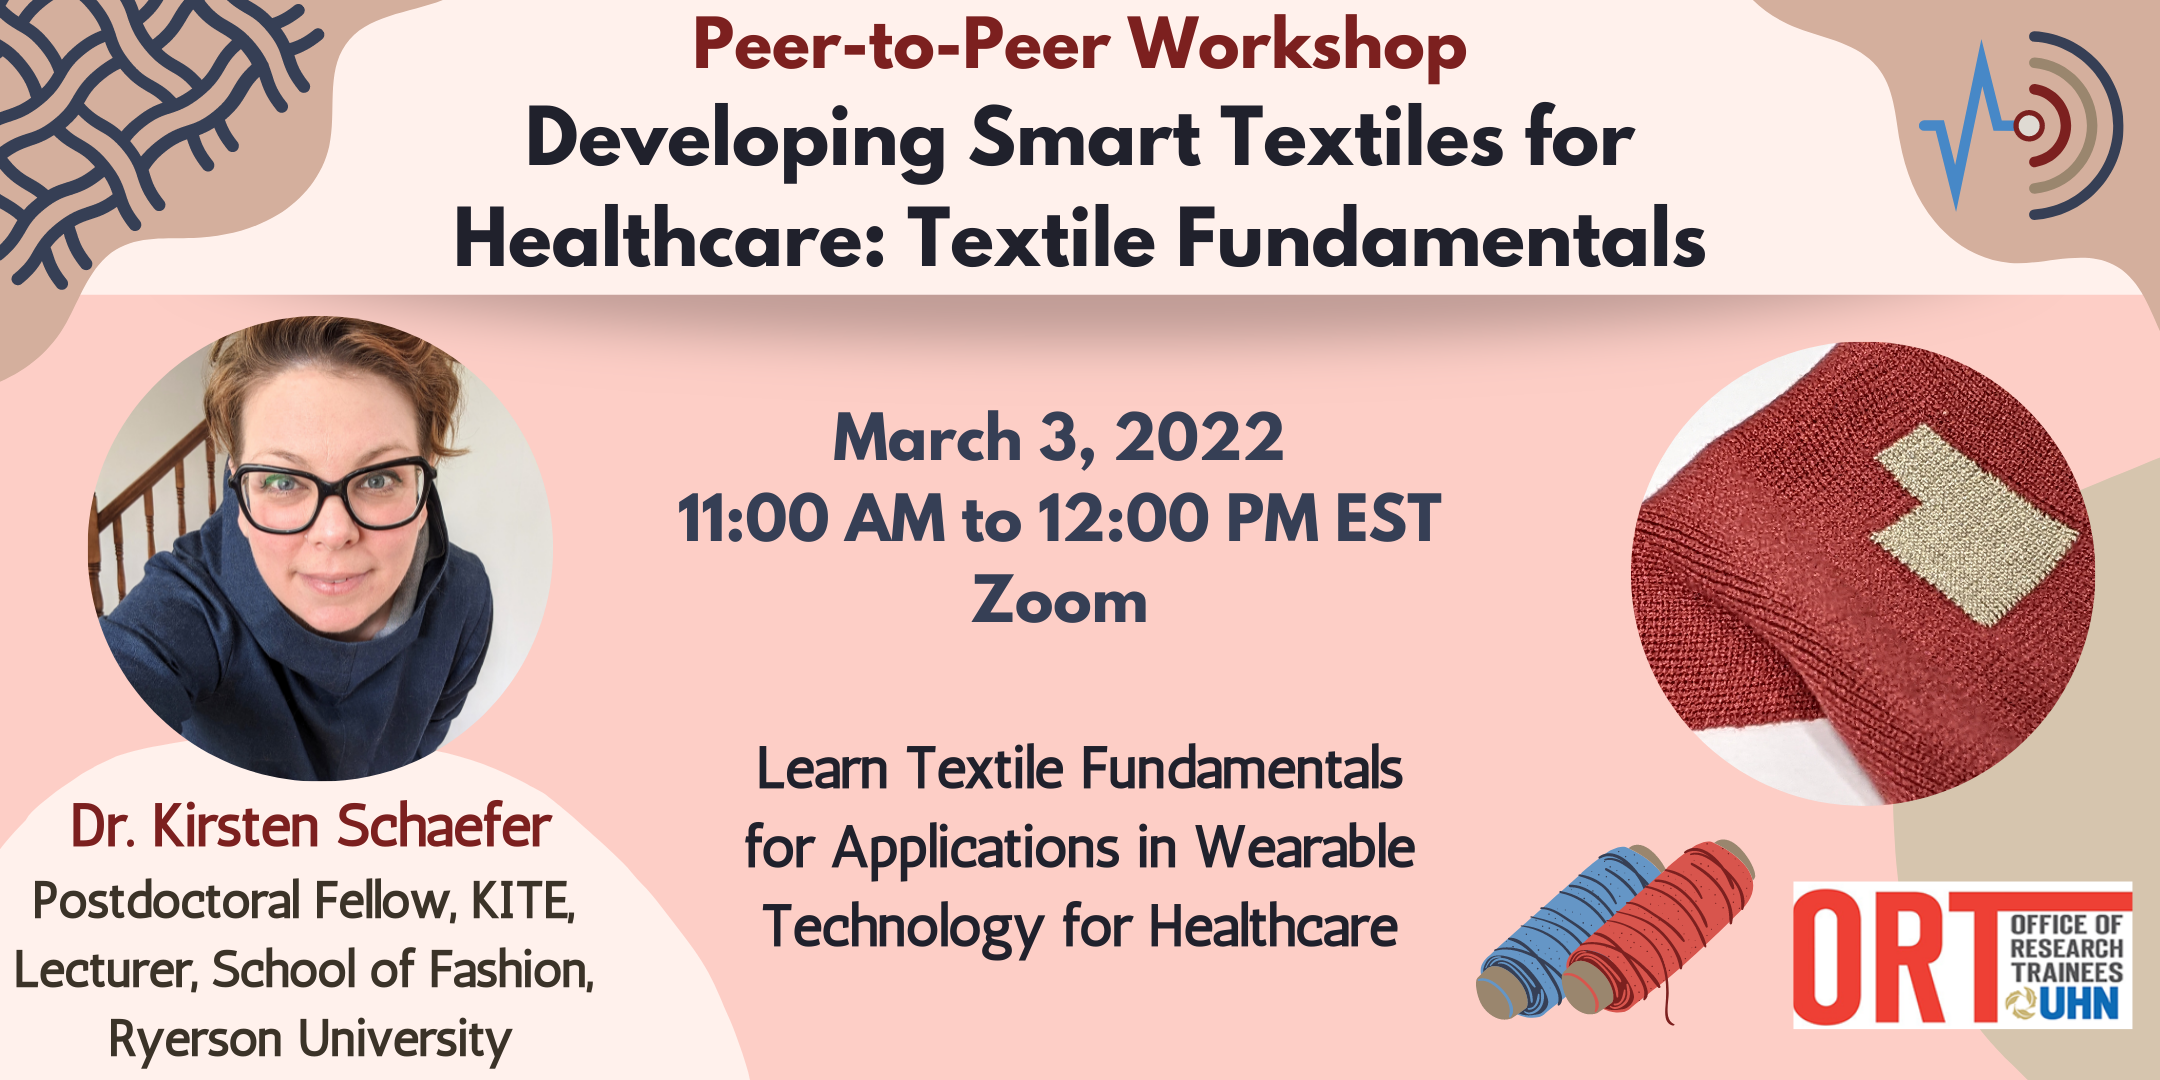 A poster advertising the peer-to-peer workshop "Developing Smart Textiles for Healthcare Textile Fundamentals. On the left is a photo of the guest speaker, Dr. Kirsten Schaefer. On the right is a photo of some smart textile fabric with a sensor patch visible. Text in the middle reads "Learn textile fundamentals for applications in wearable technology for healthcare."